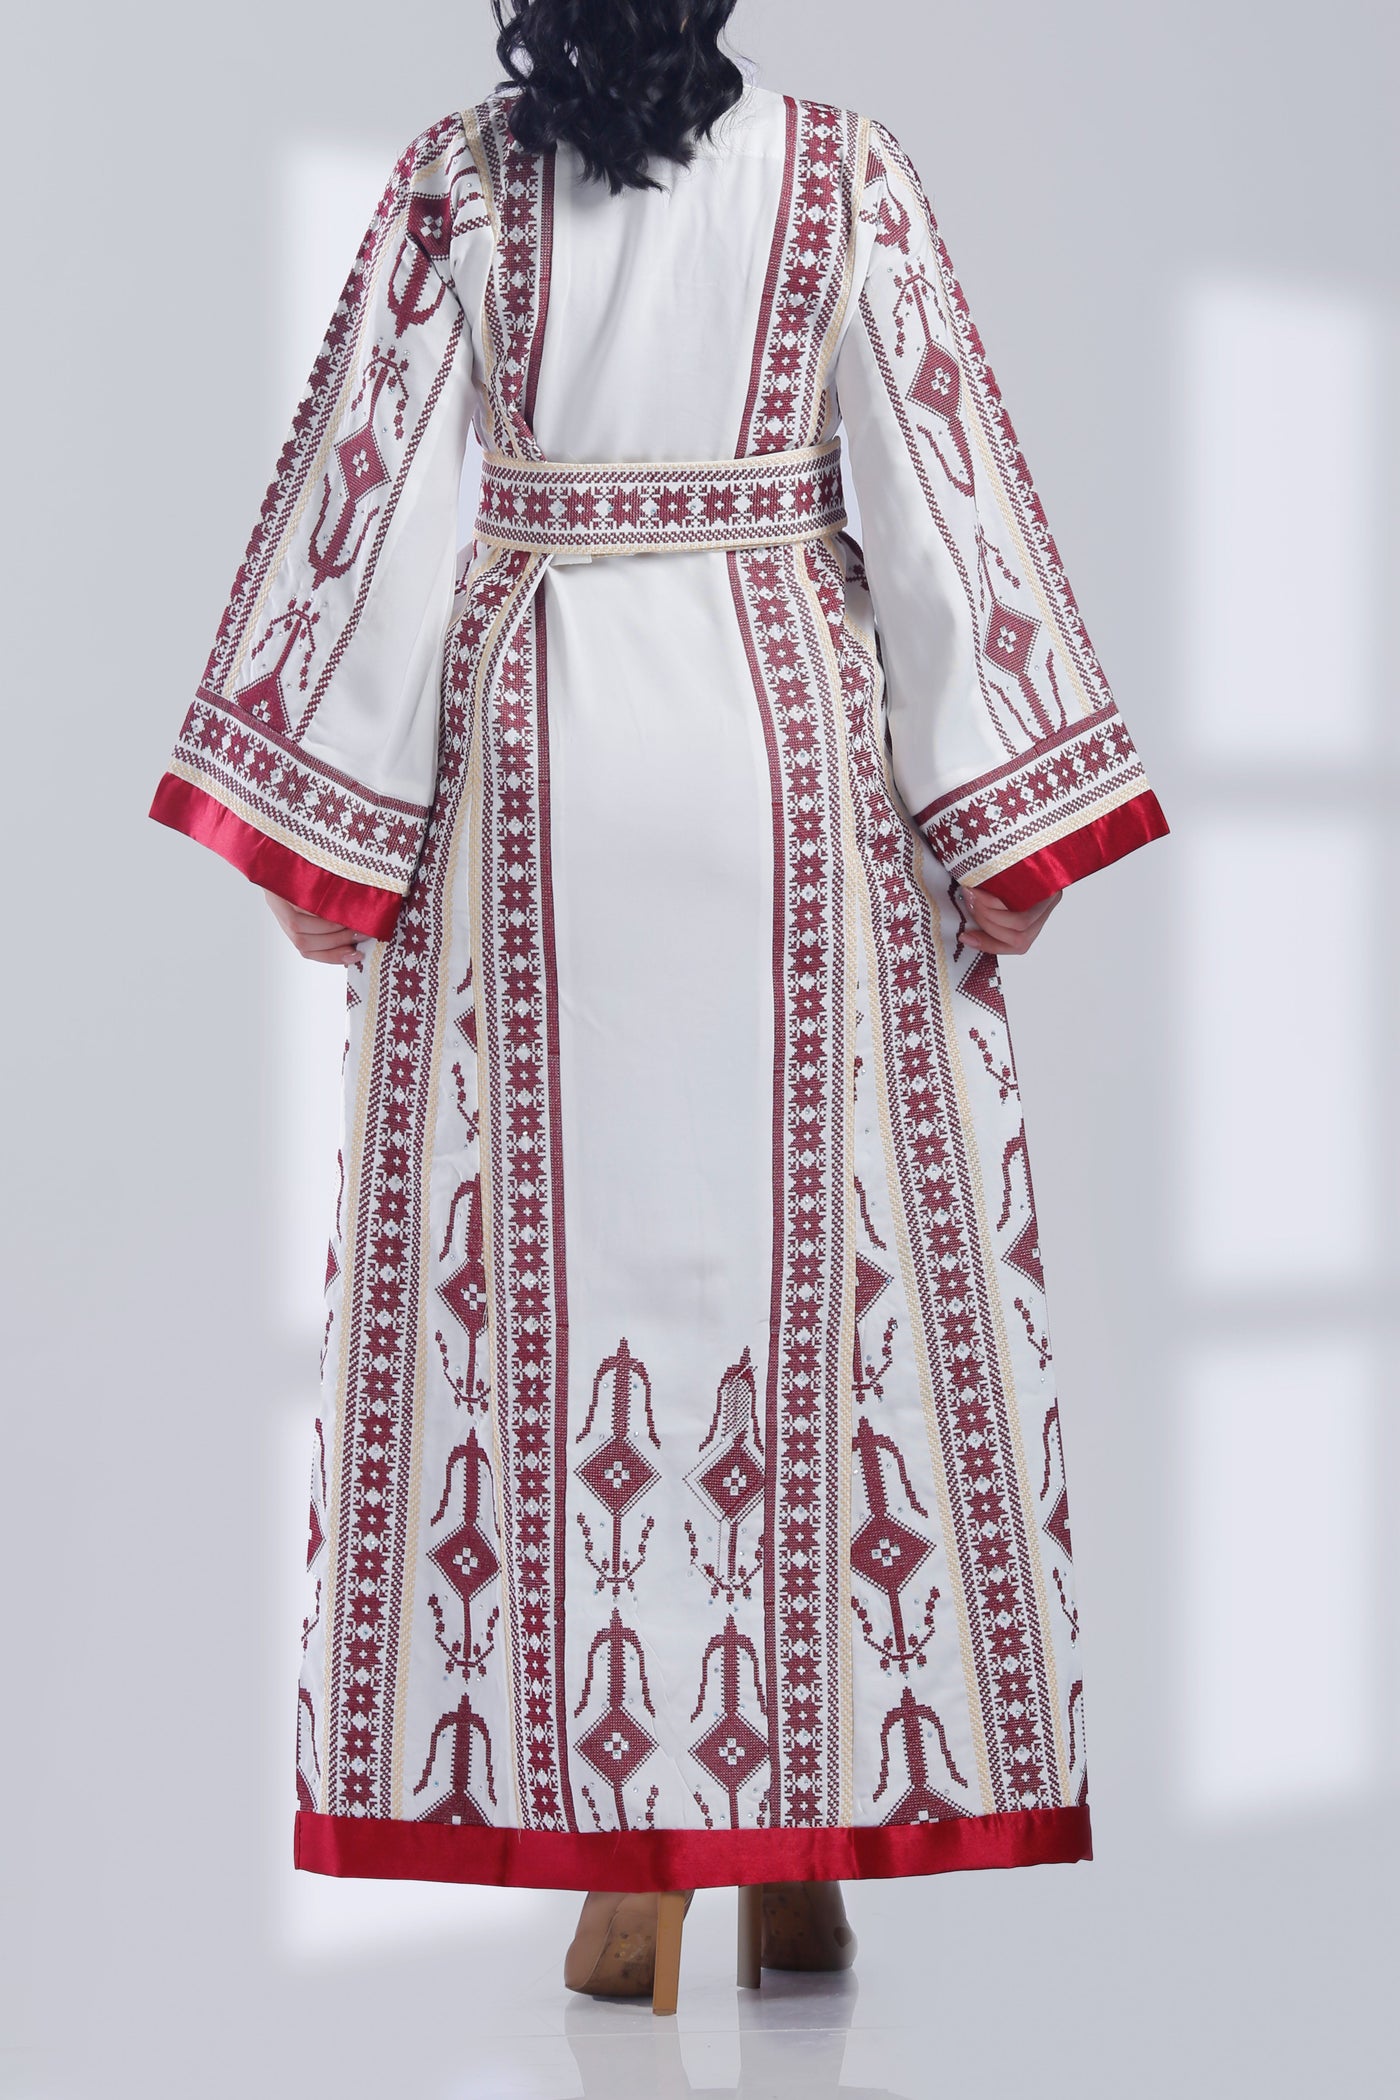 Gazan Resilience - Traditional Embroidered Palestinian style Thobe for women